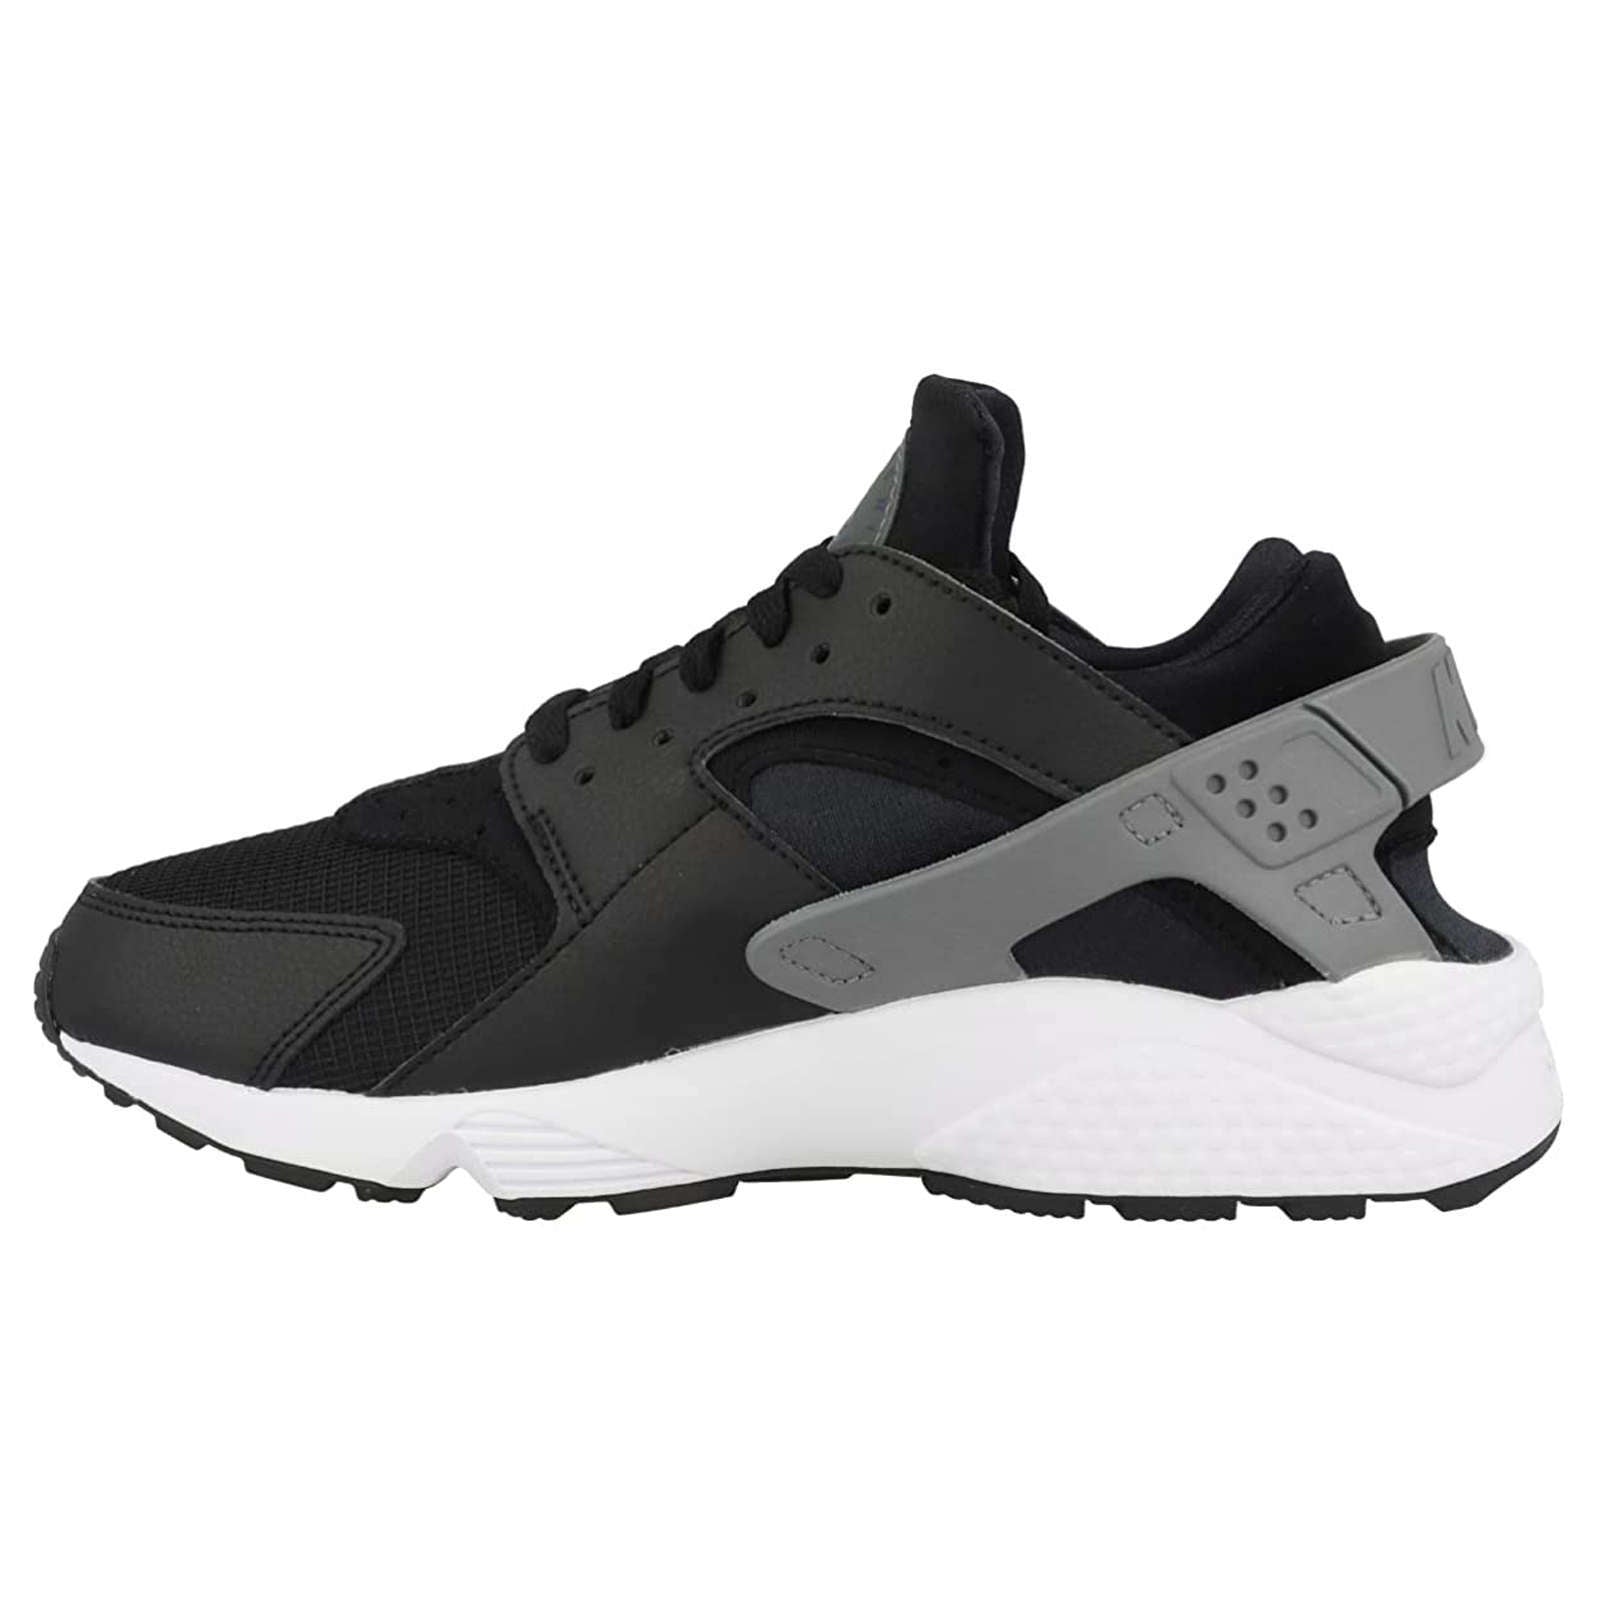 Nike Air Huarache J22 Synthetic Textile Unisex Low-Top Trainers#color_black marina smoke grey white